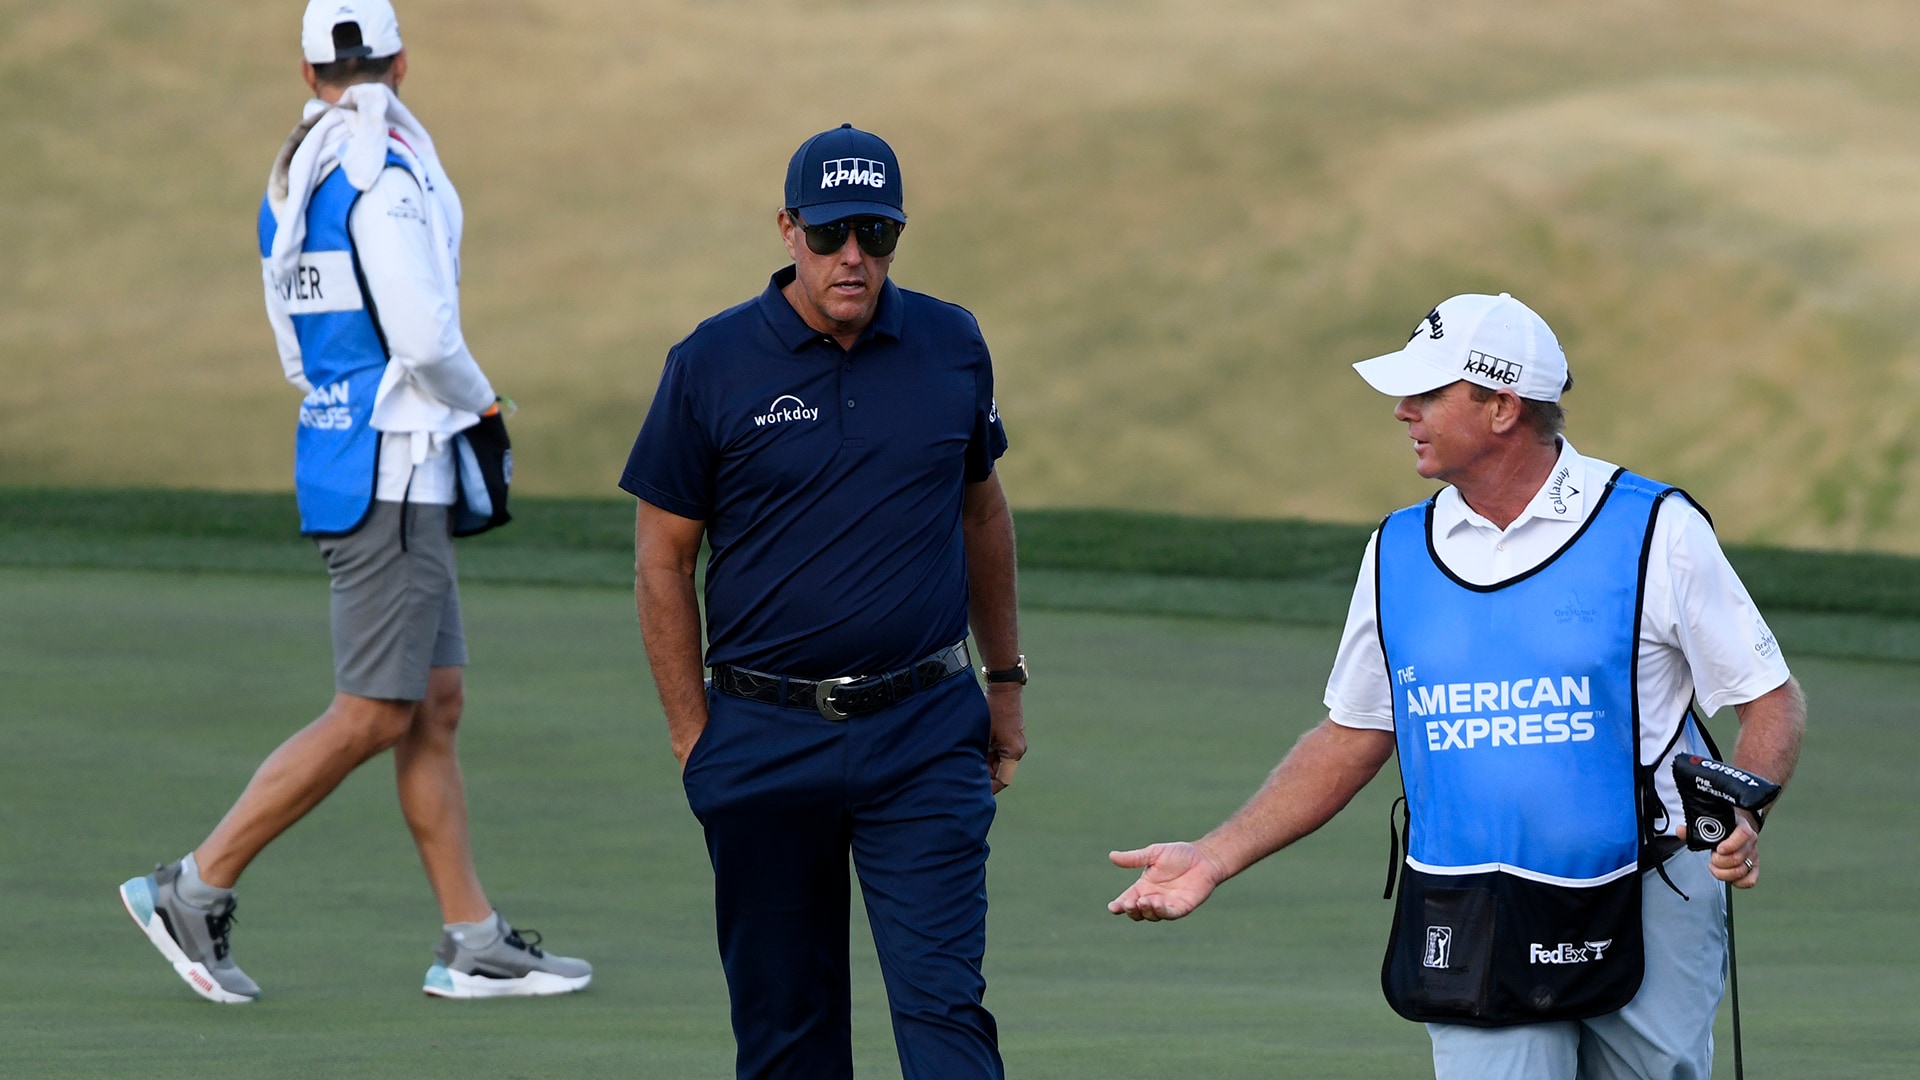 Phil Mickelson did something Friday that he'd never done on the PGA Tour 2